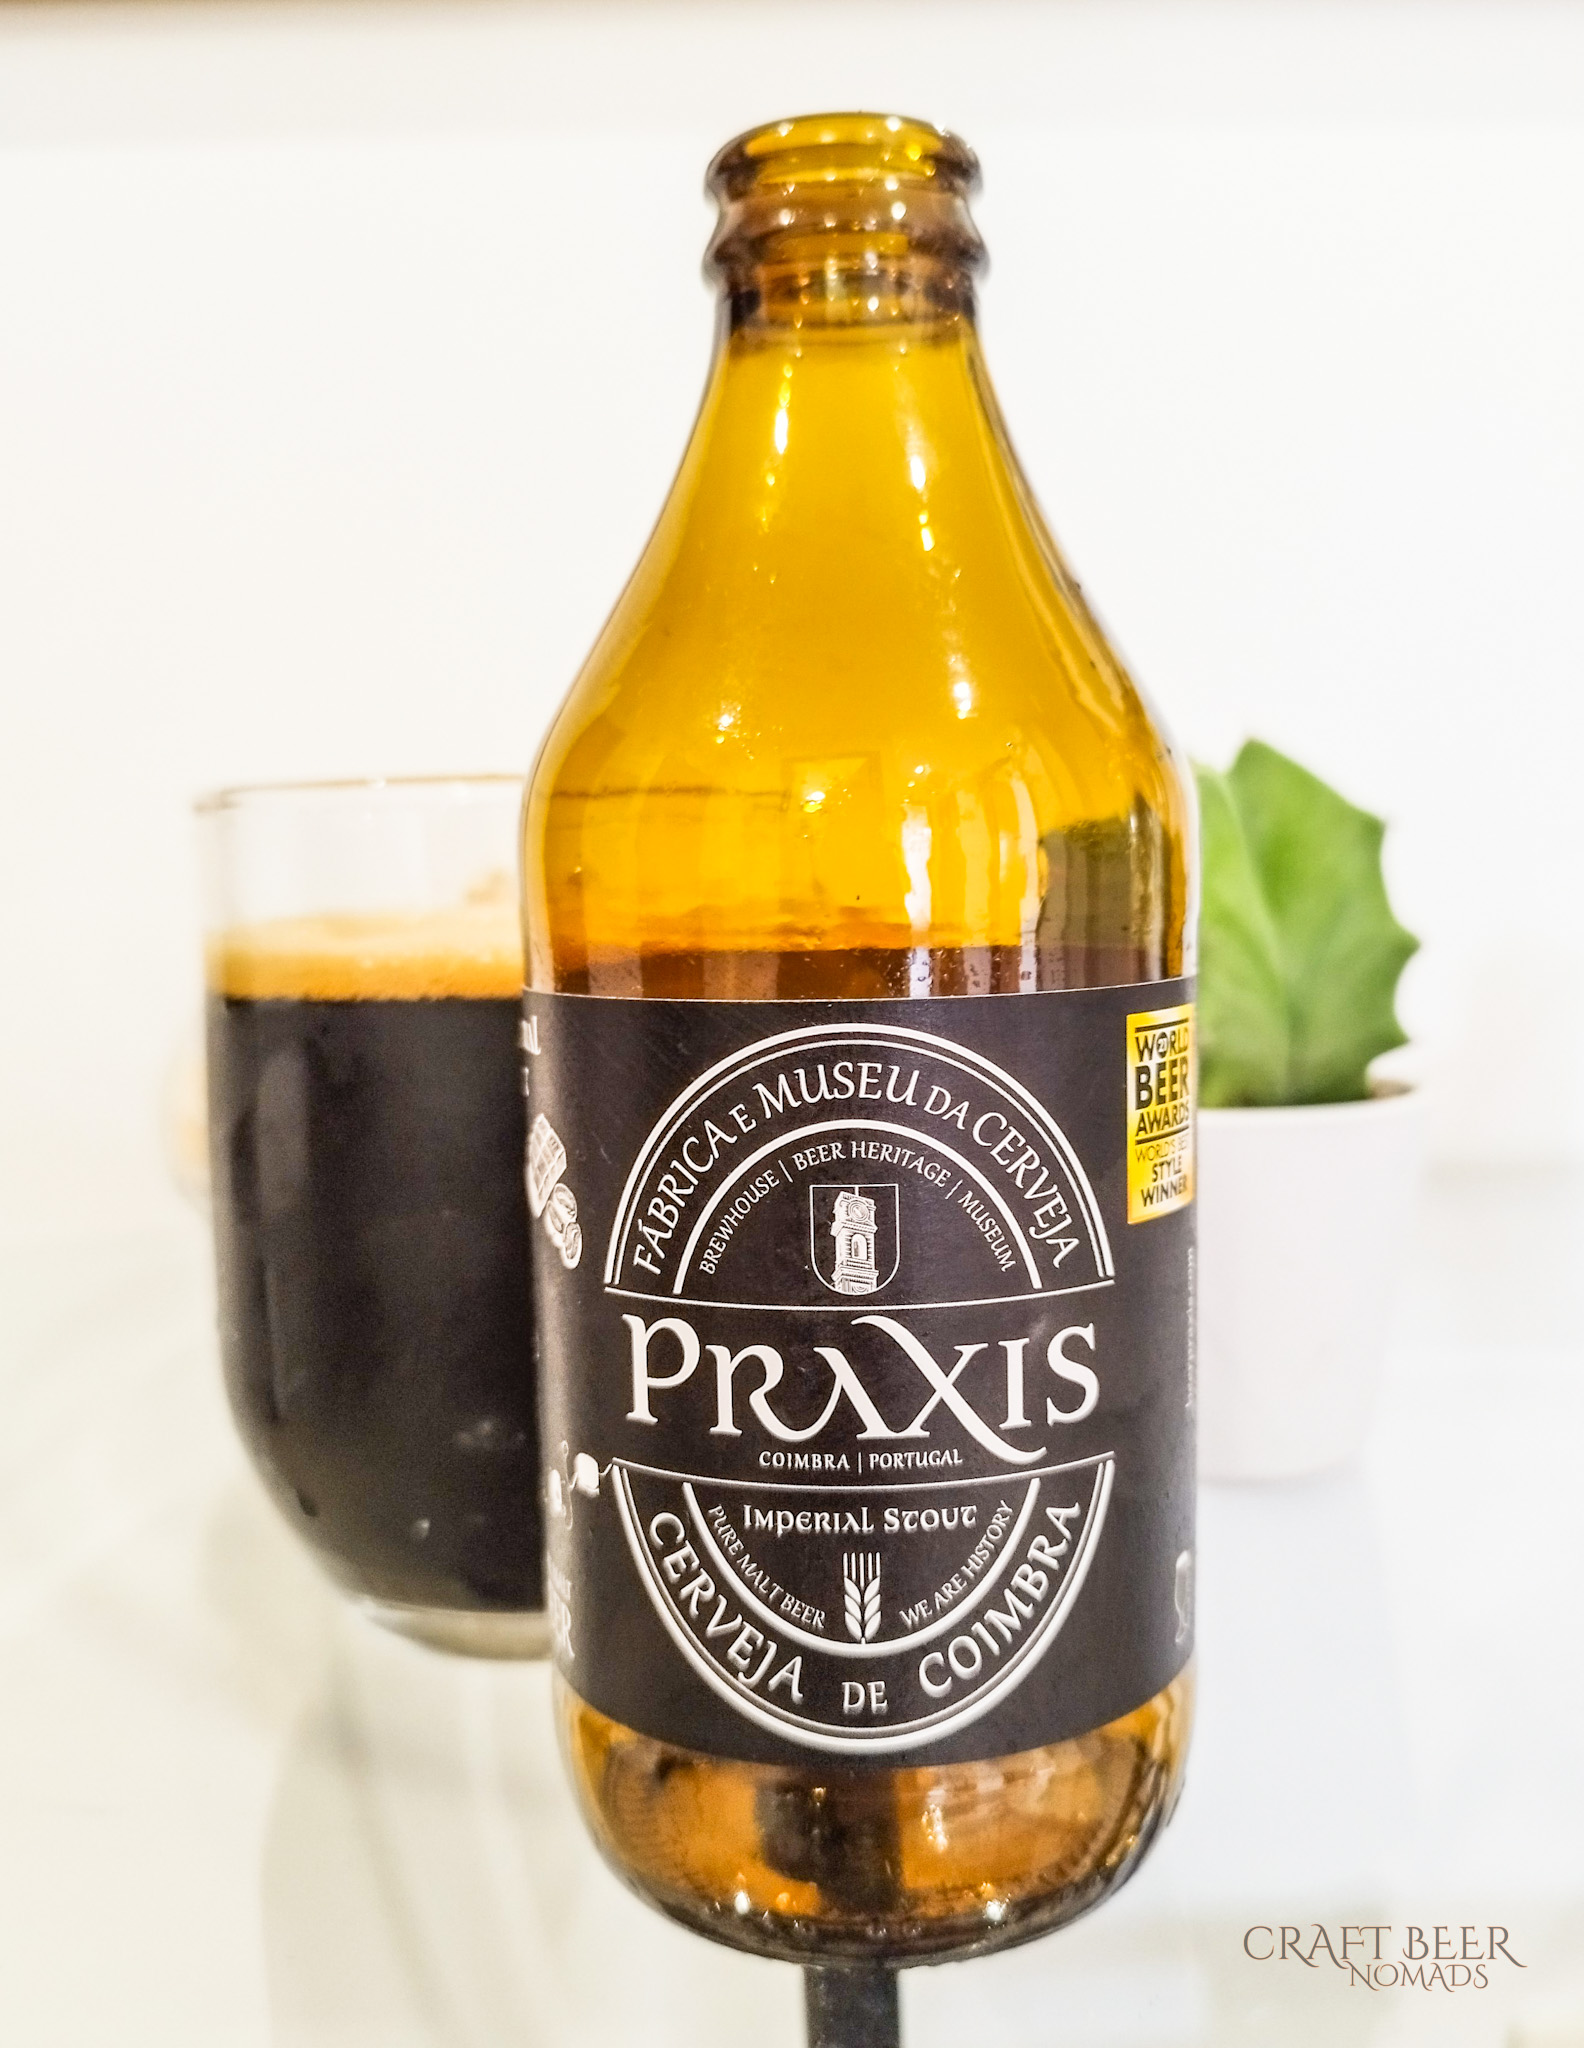 Imperial Stour beer by Praxis brewery from Coimbra, Portugal